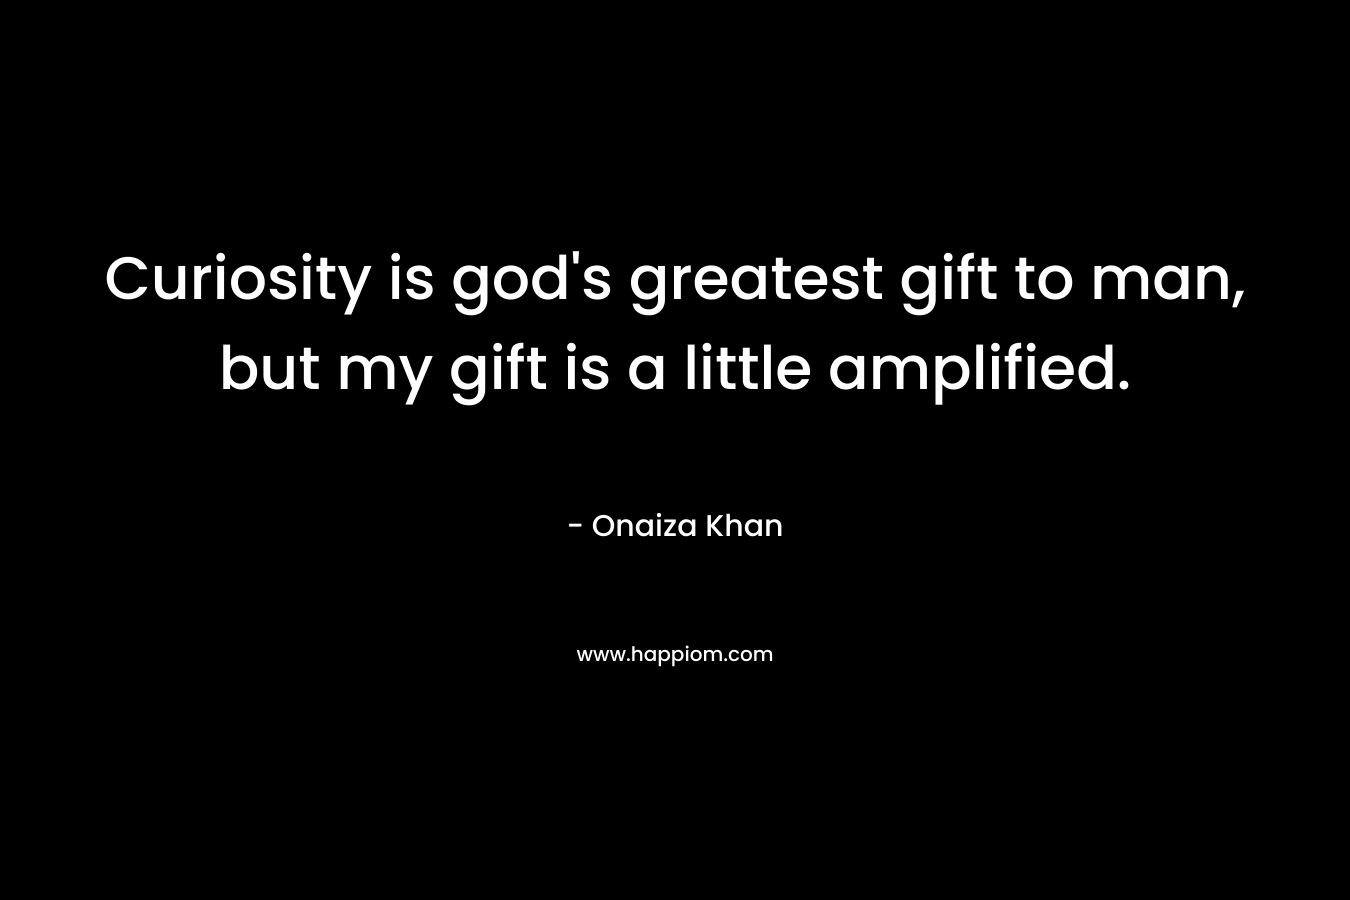 Curiosity is god’s greatest gift to man, but my gift is a little amplified. – Onaiza Khan